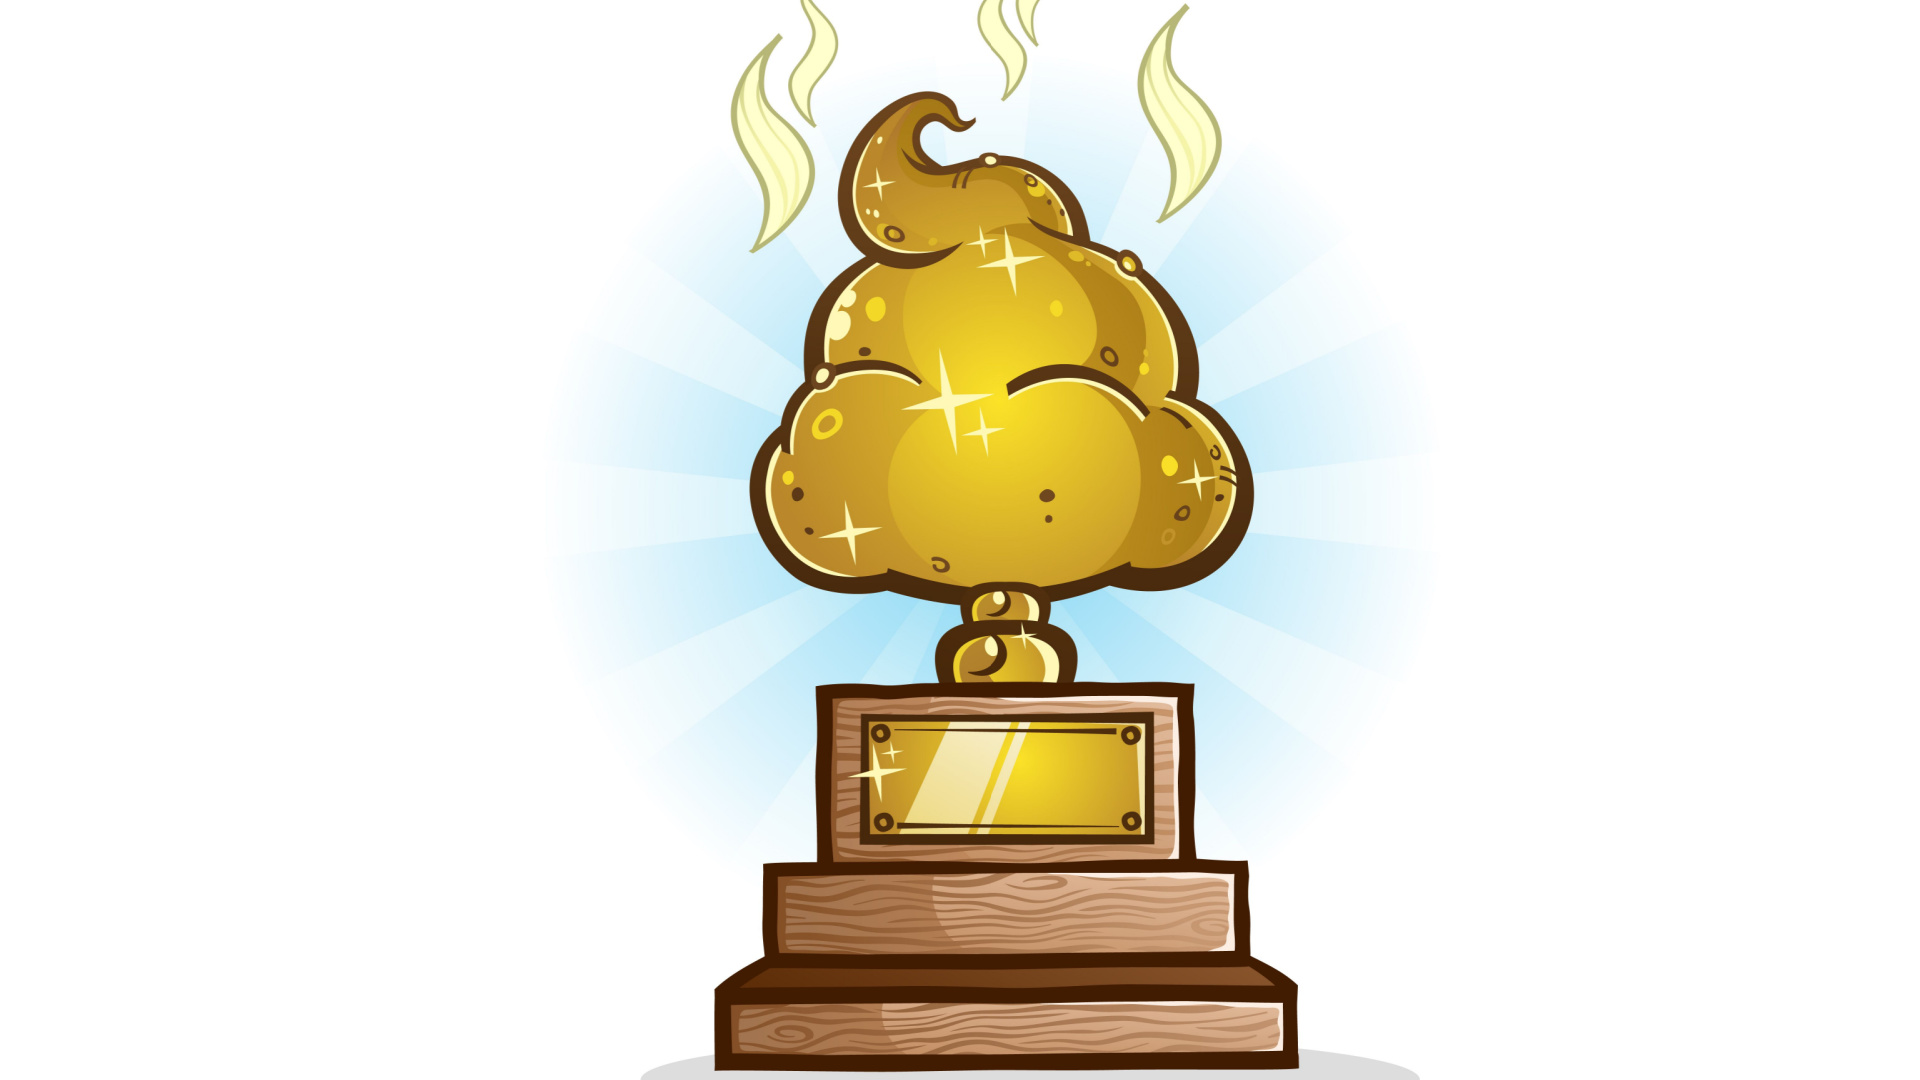 A Crappy Poop Trophy for a Last Place Award